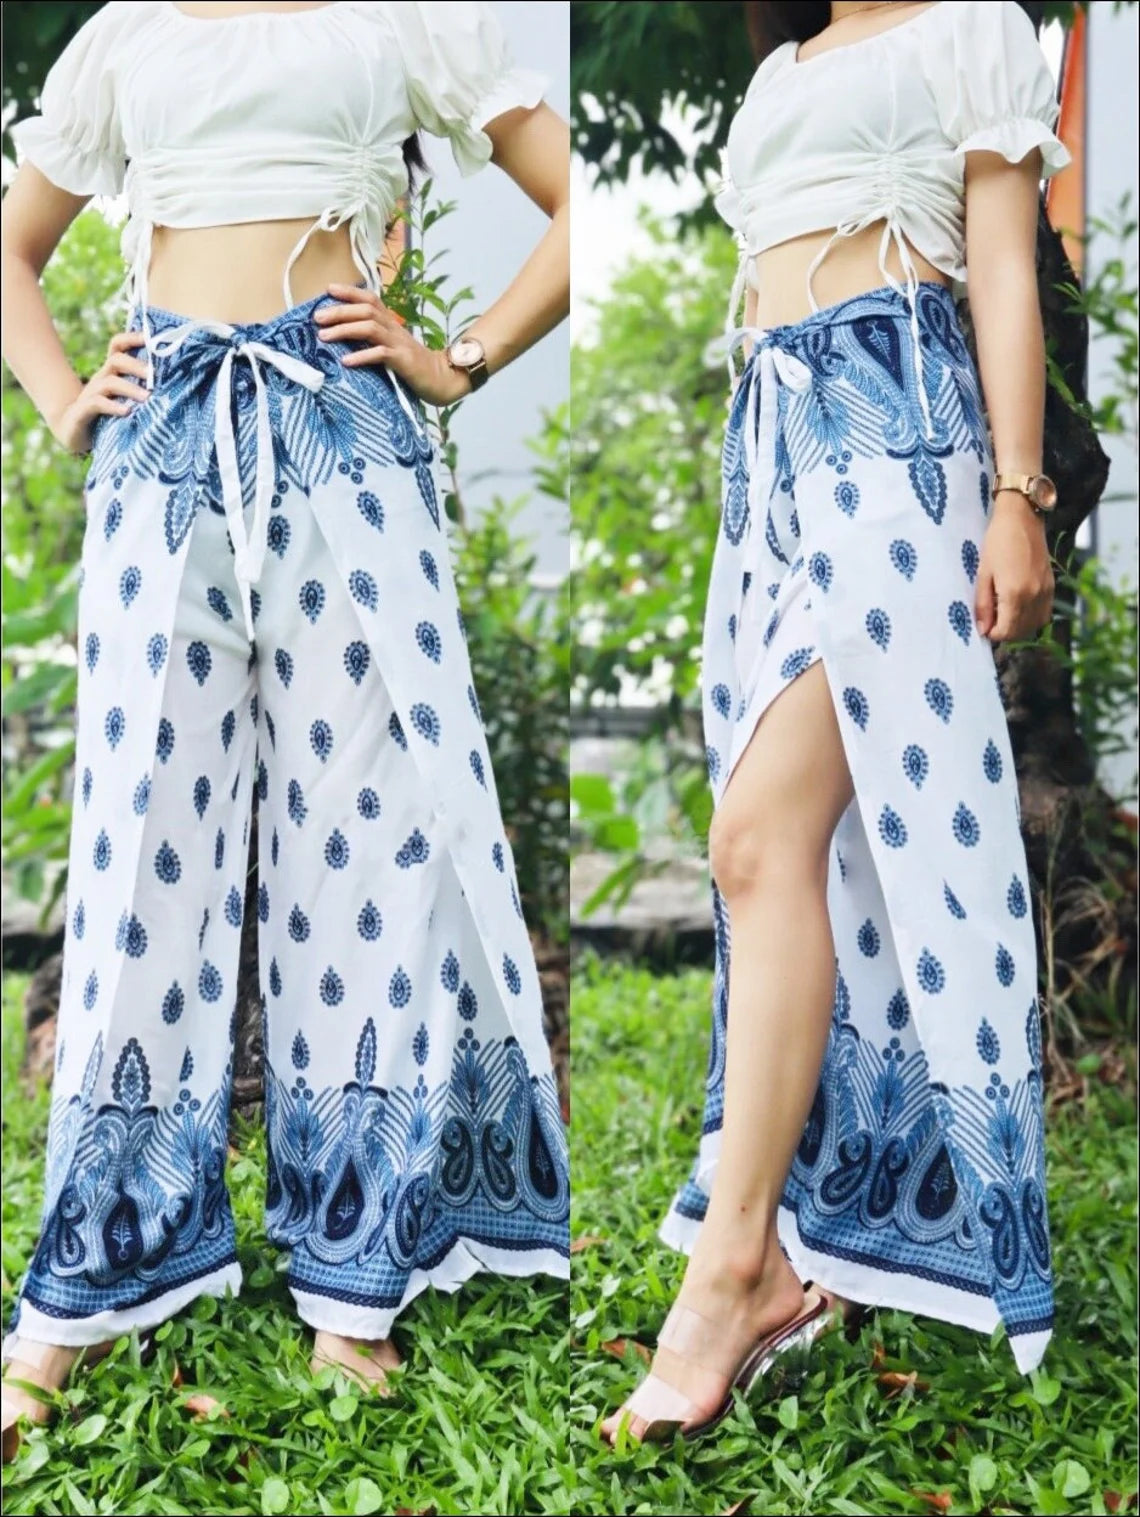 Chic boho wrap pants with a white and blue pattern, showcasing the unique wrap design in a natural outdoor setting.